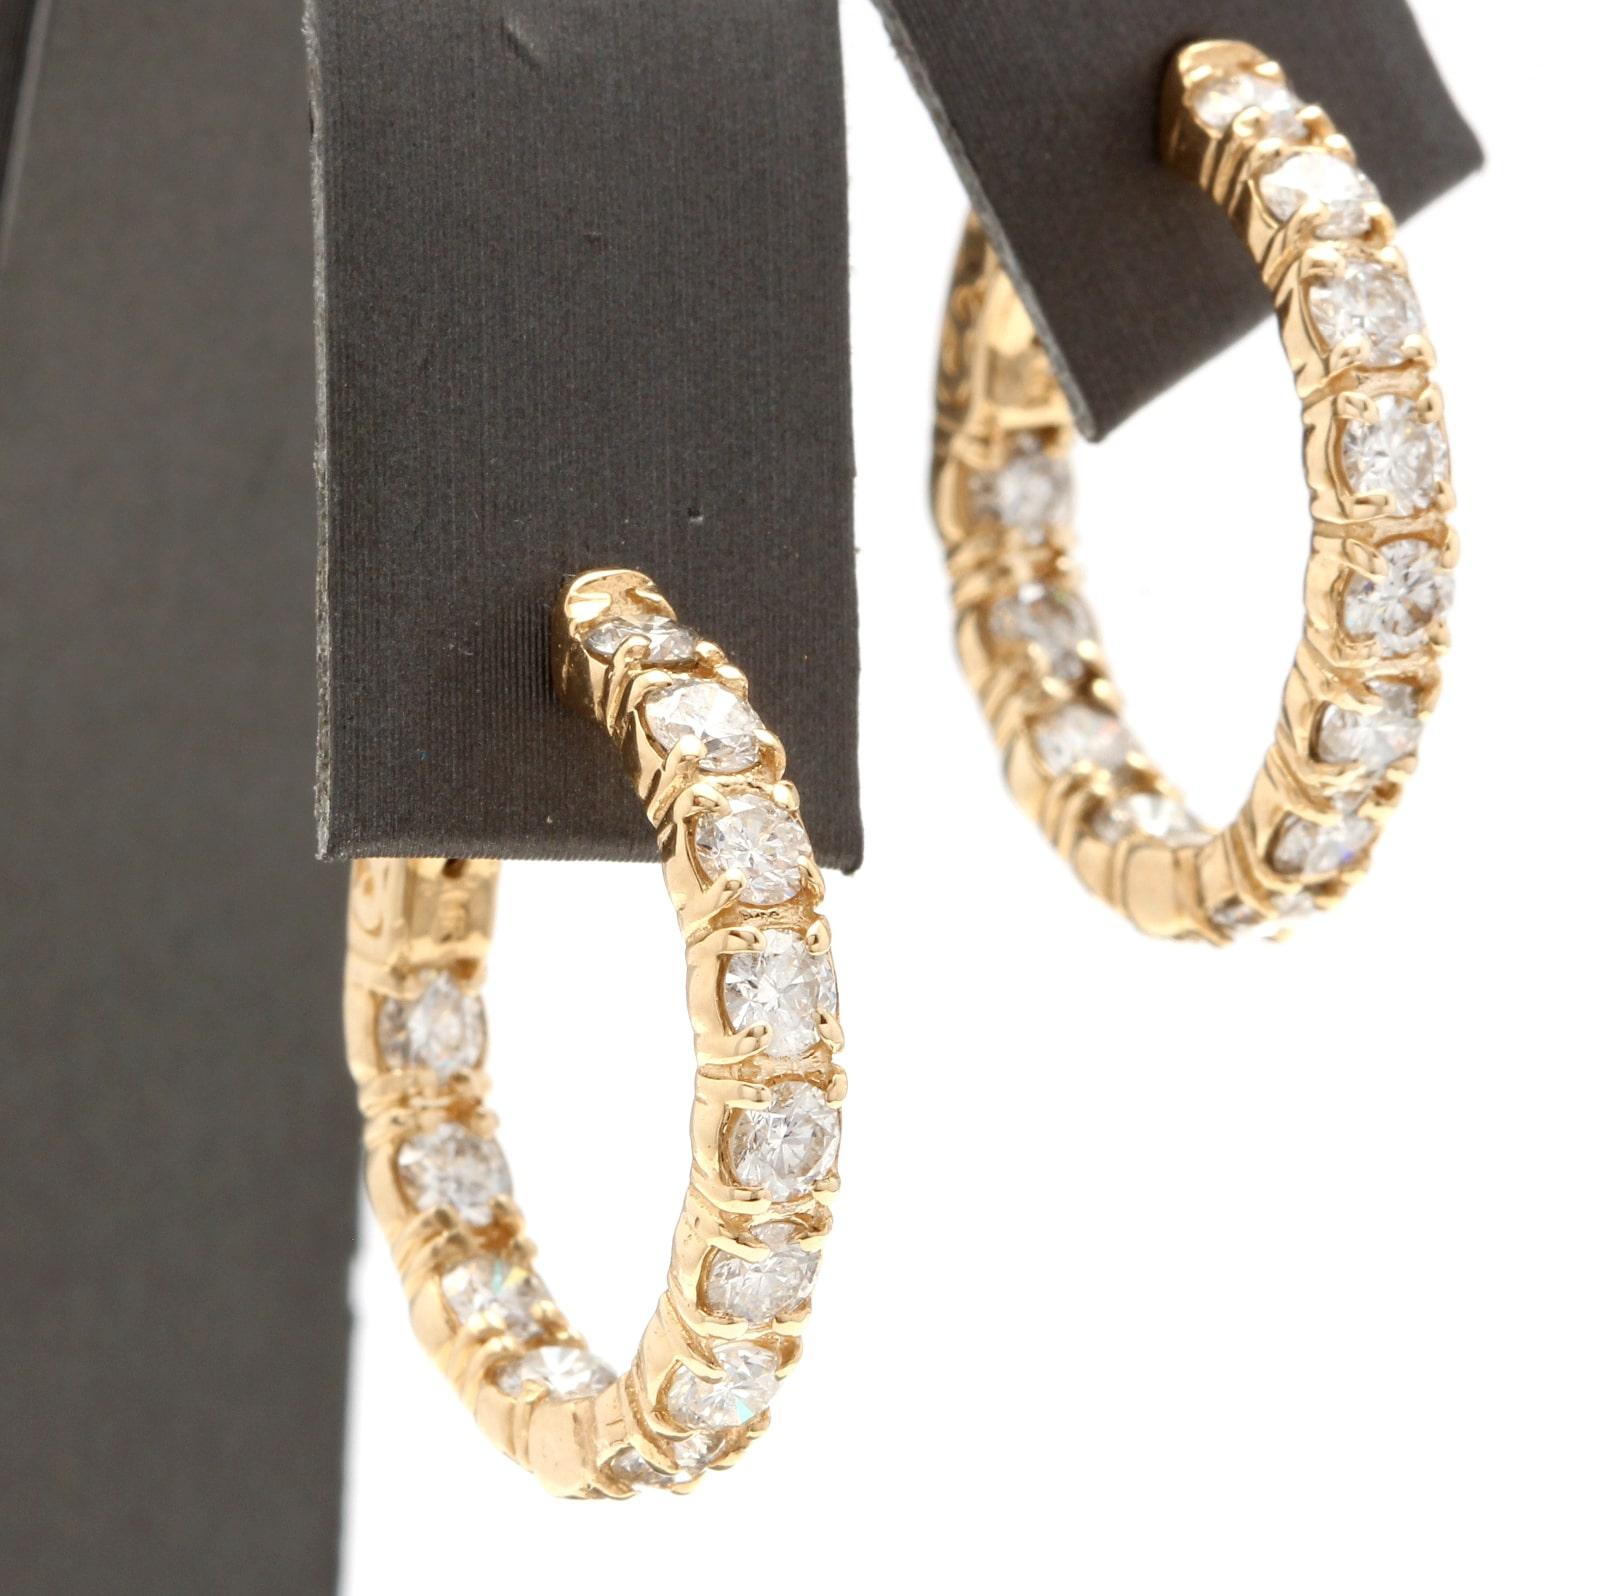 Exquisite 3.50 Carats Natural Diamond 14K Solid Yellow Gold Hoop Earrings

Amazing looking piece!

Inside Out Diamonds.

Earrings have safety lock.

Total Natural Round Cut White Diamonds Weight: Approx. 3.50 Carats (color G-H / Clarity